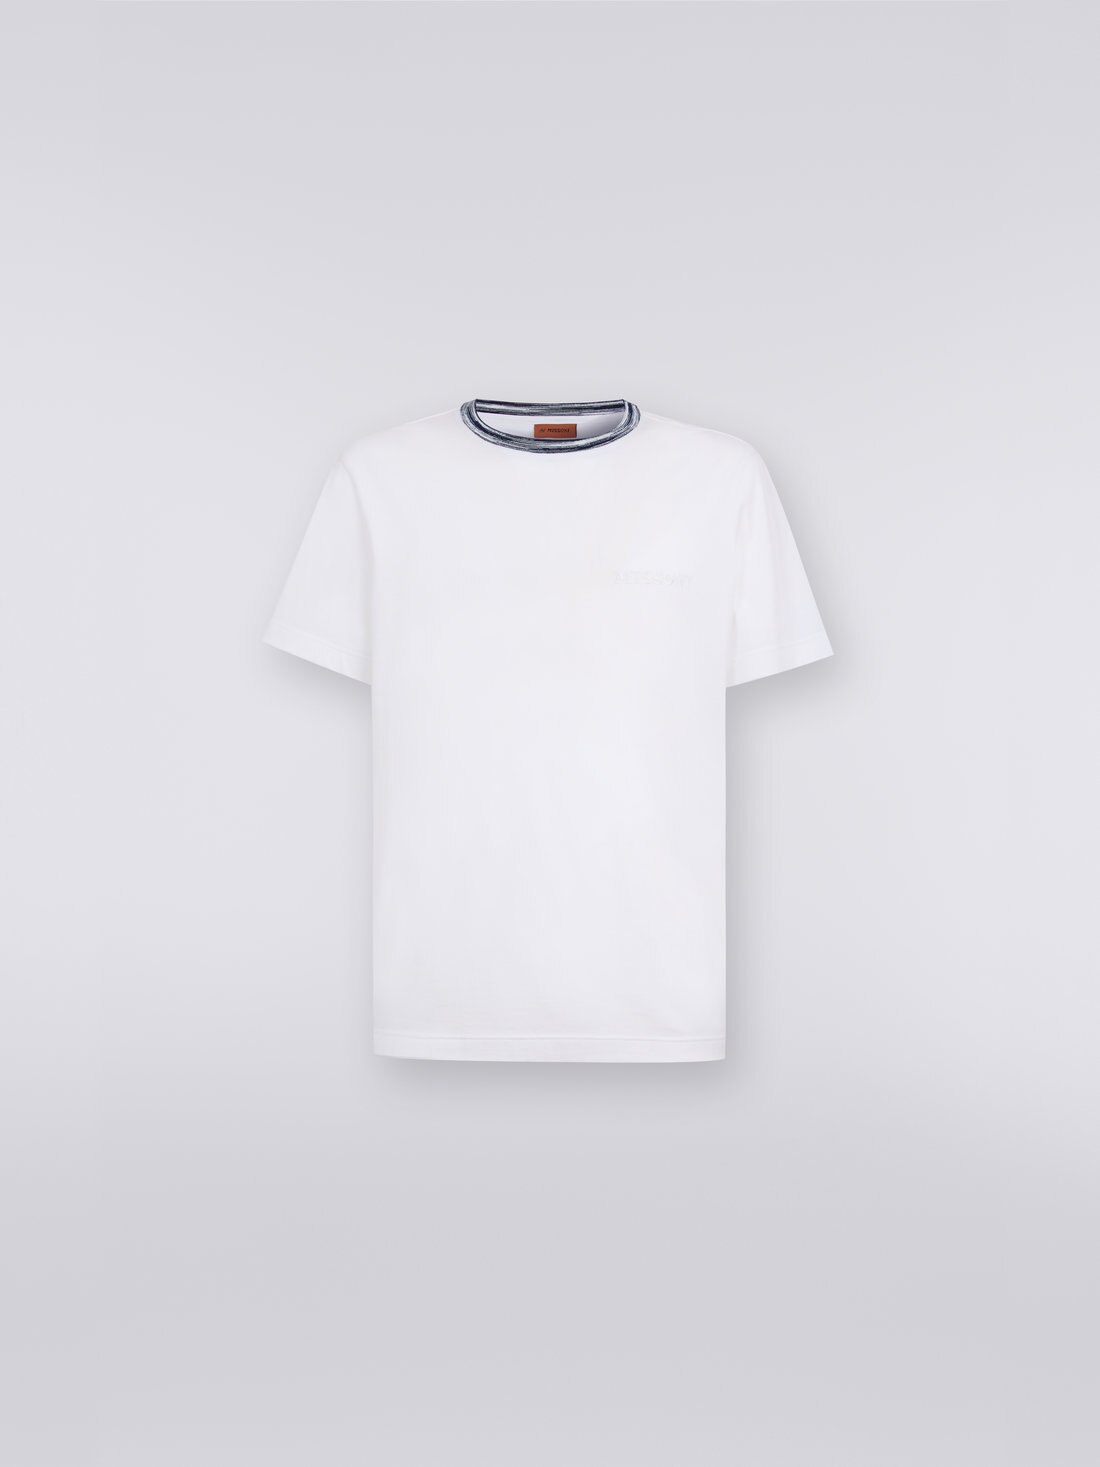 Crew-neck cotton T-shirt with contrasting detail and logo lettering, White  - 0